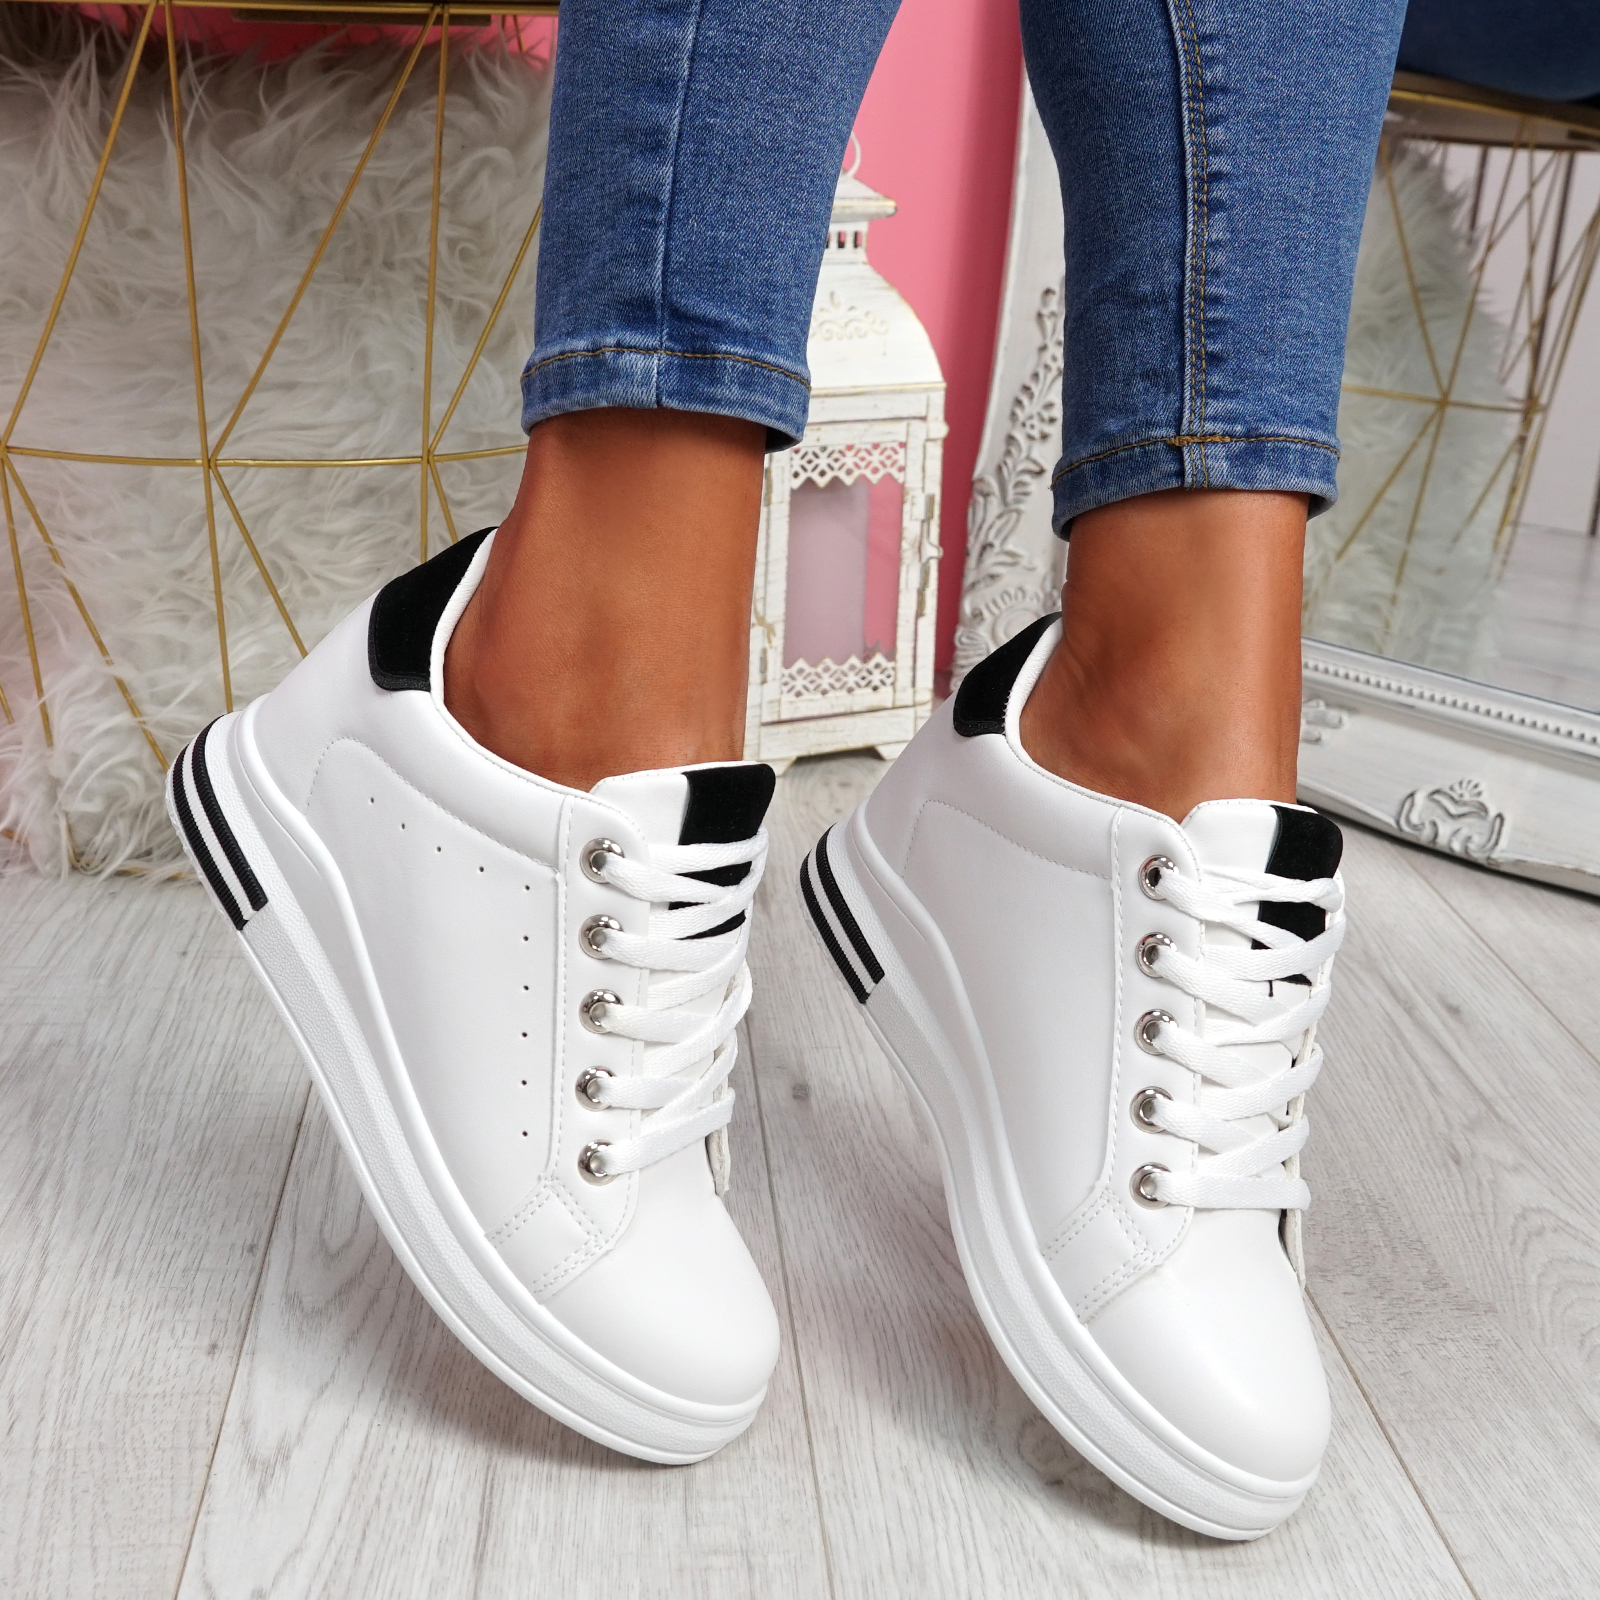 Womens Ladies Wedge Trainers Lace Up Slip On Party Sneakers Women Shoes Size Uk Ebay 